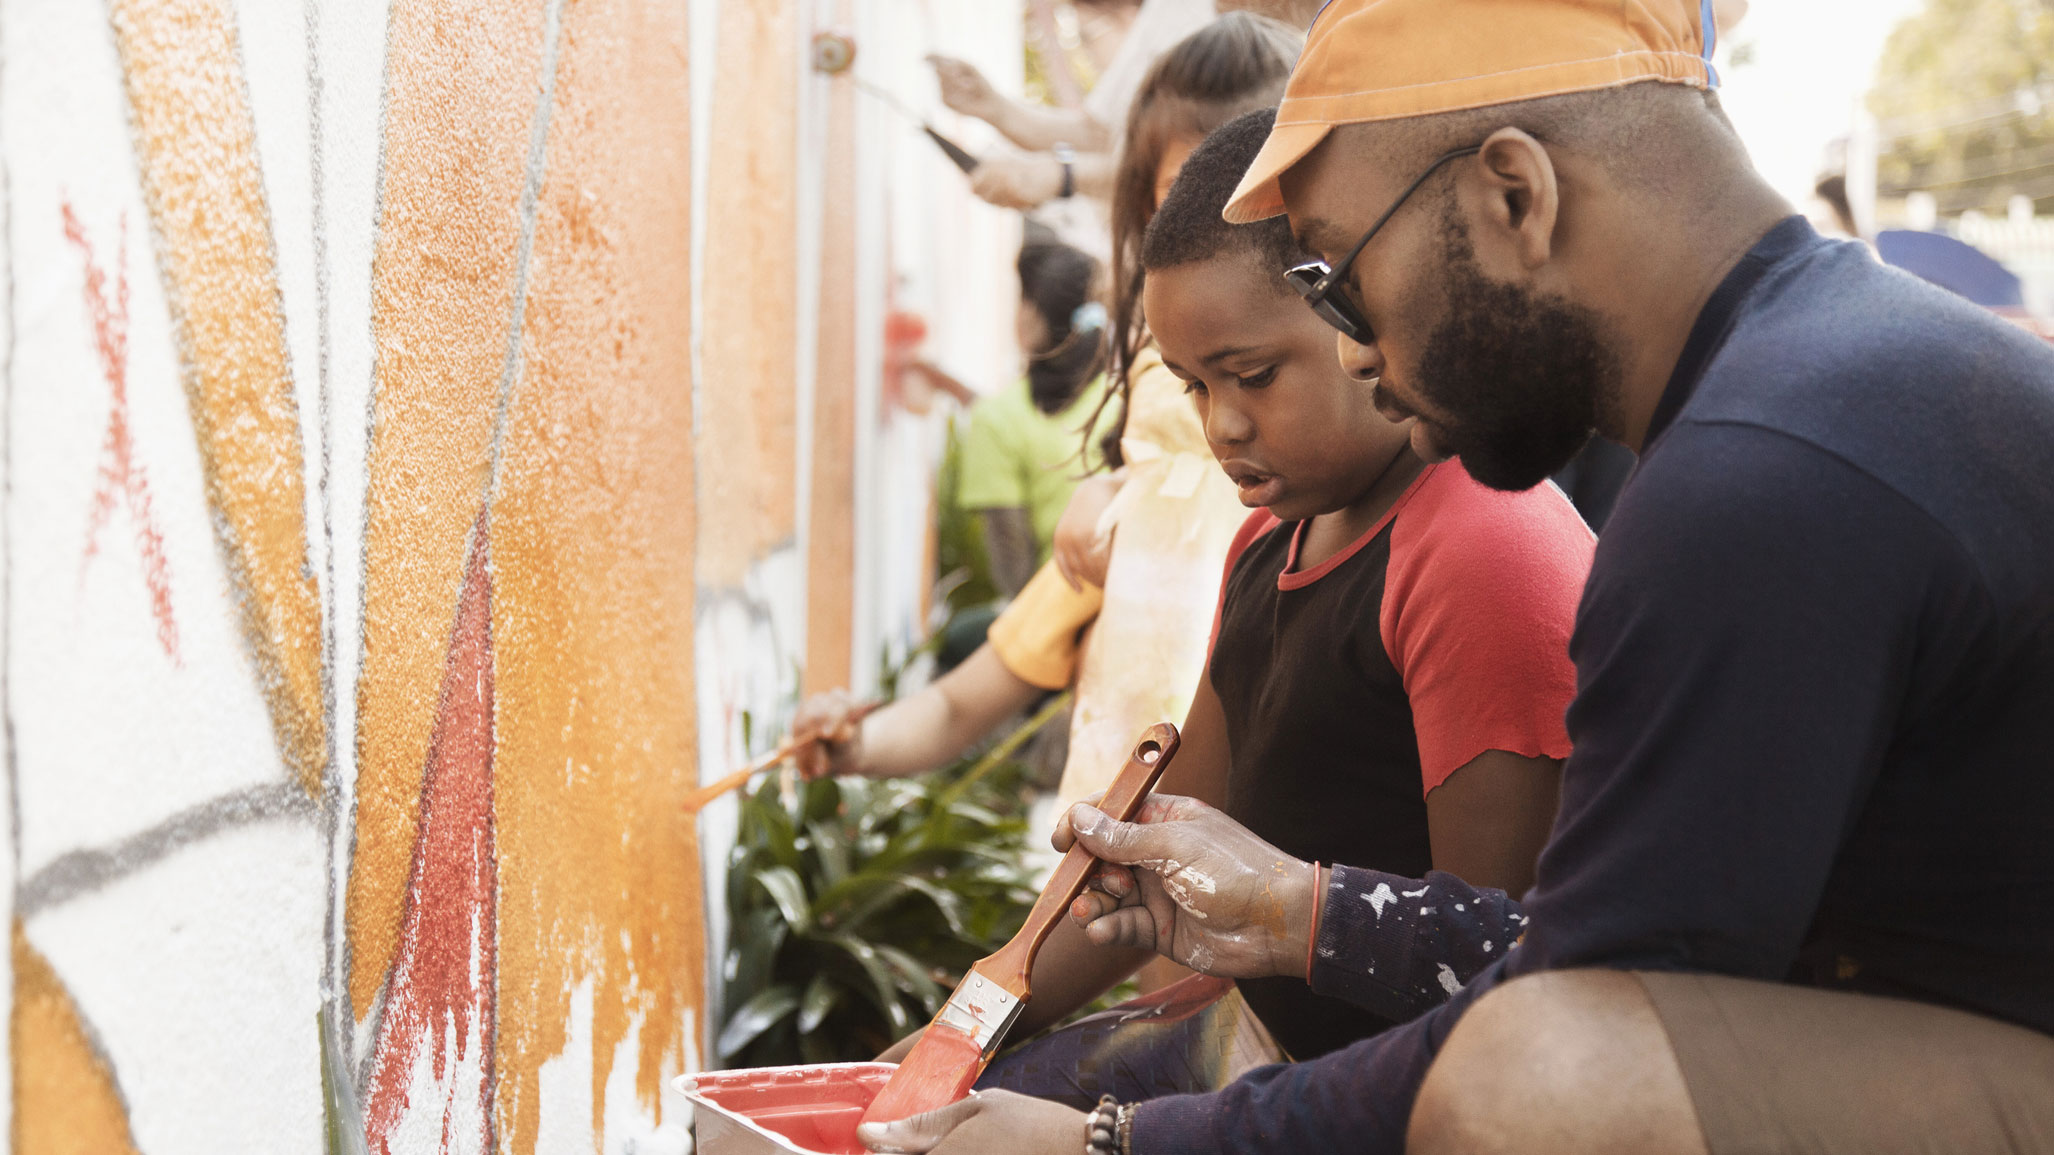 Man helping child paint a wall while volunteering